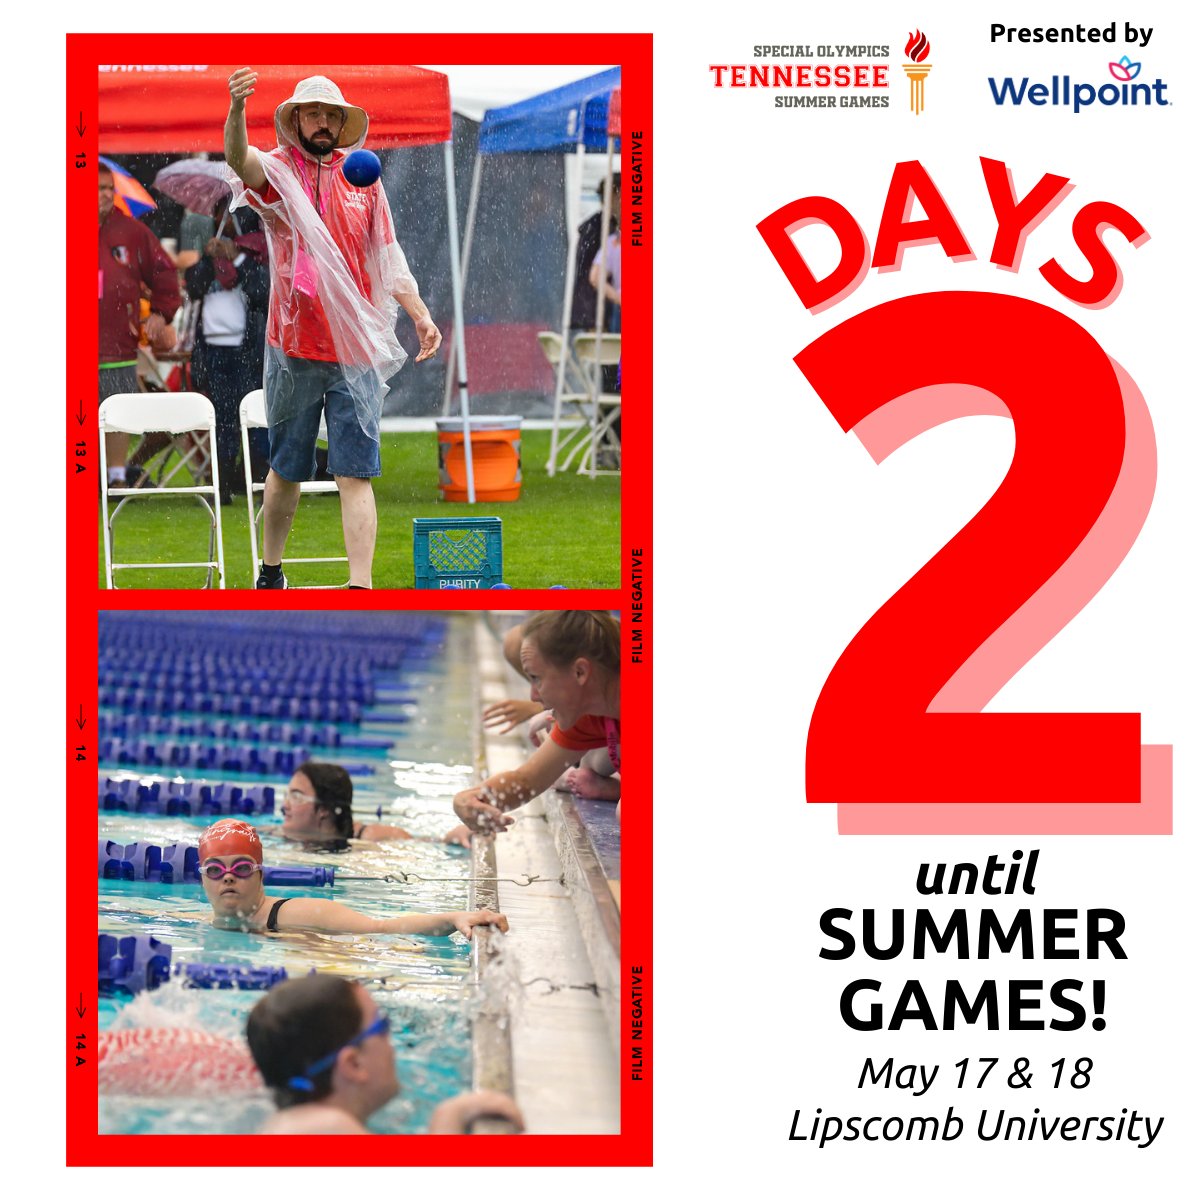 In TWO days, athletes across the state will descend upon Nashville to compete in State Summer Games presented by @wellpoint Tennessee! Learn more about the event: specialolympicstn.org/summergames